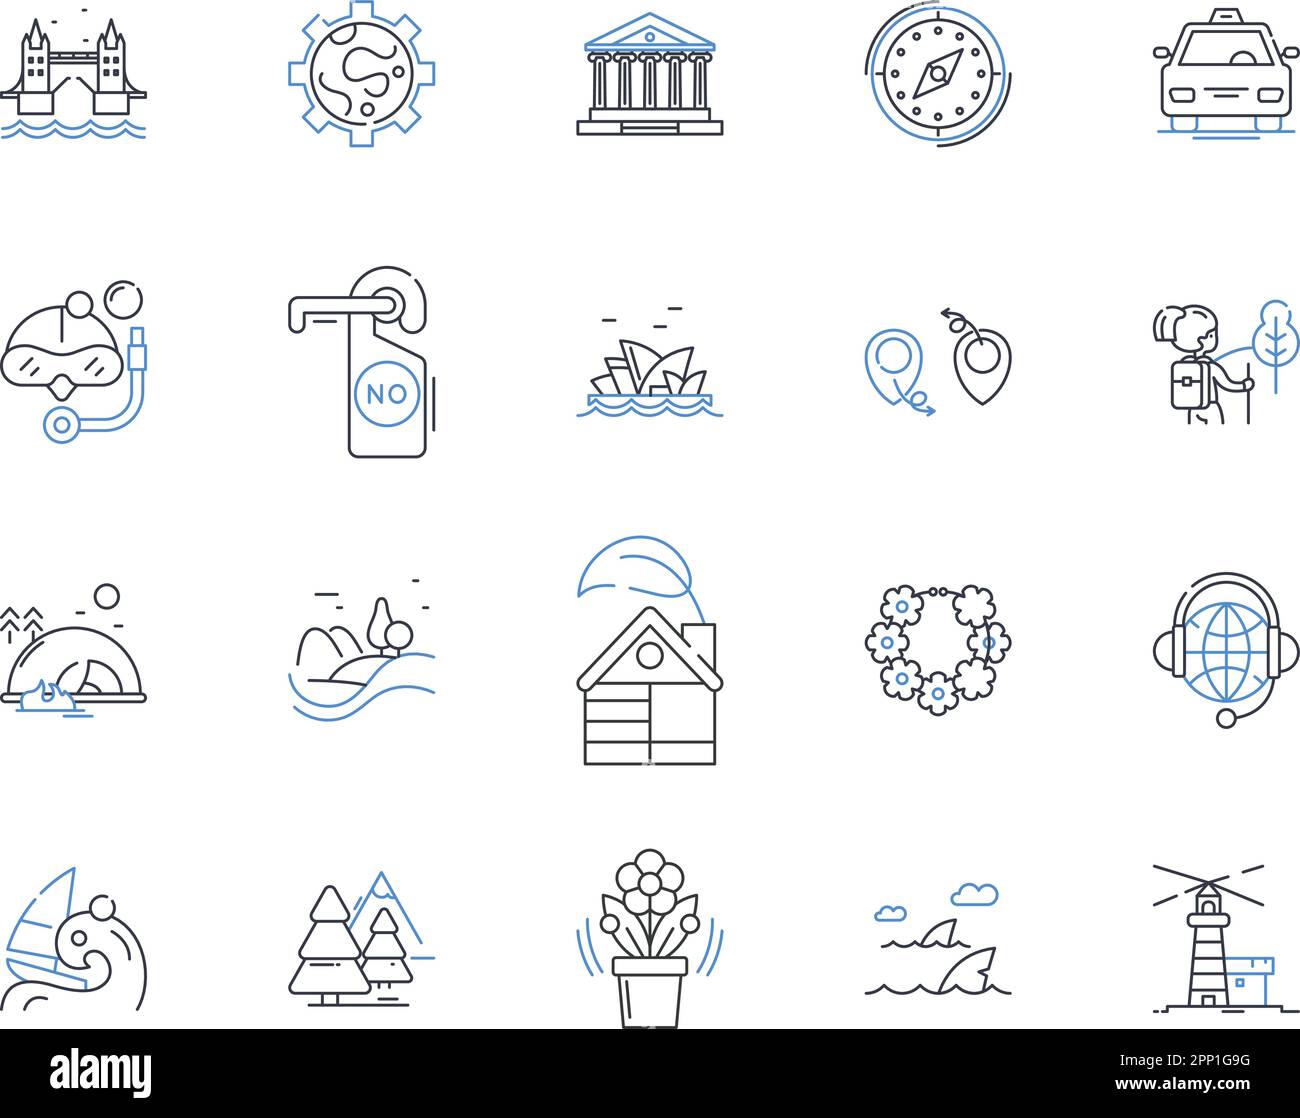 Global odyssey line icons collection. Adventure, Exploration, Diversity, Unity, Discovery, Culture, Journey vector and linear illustration. Wanderlust Stock Vector